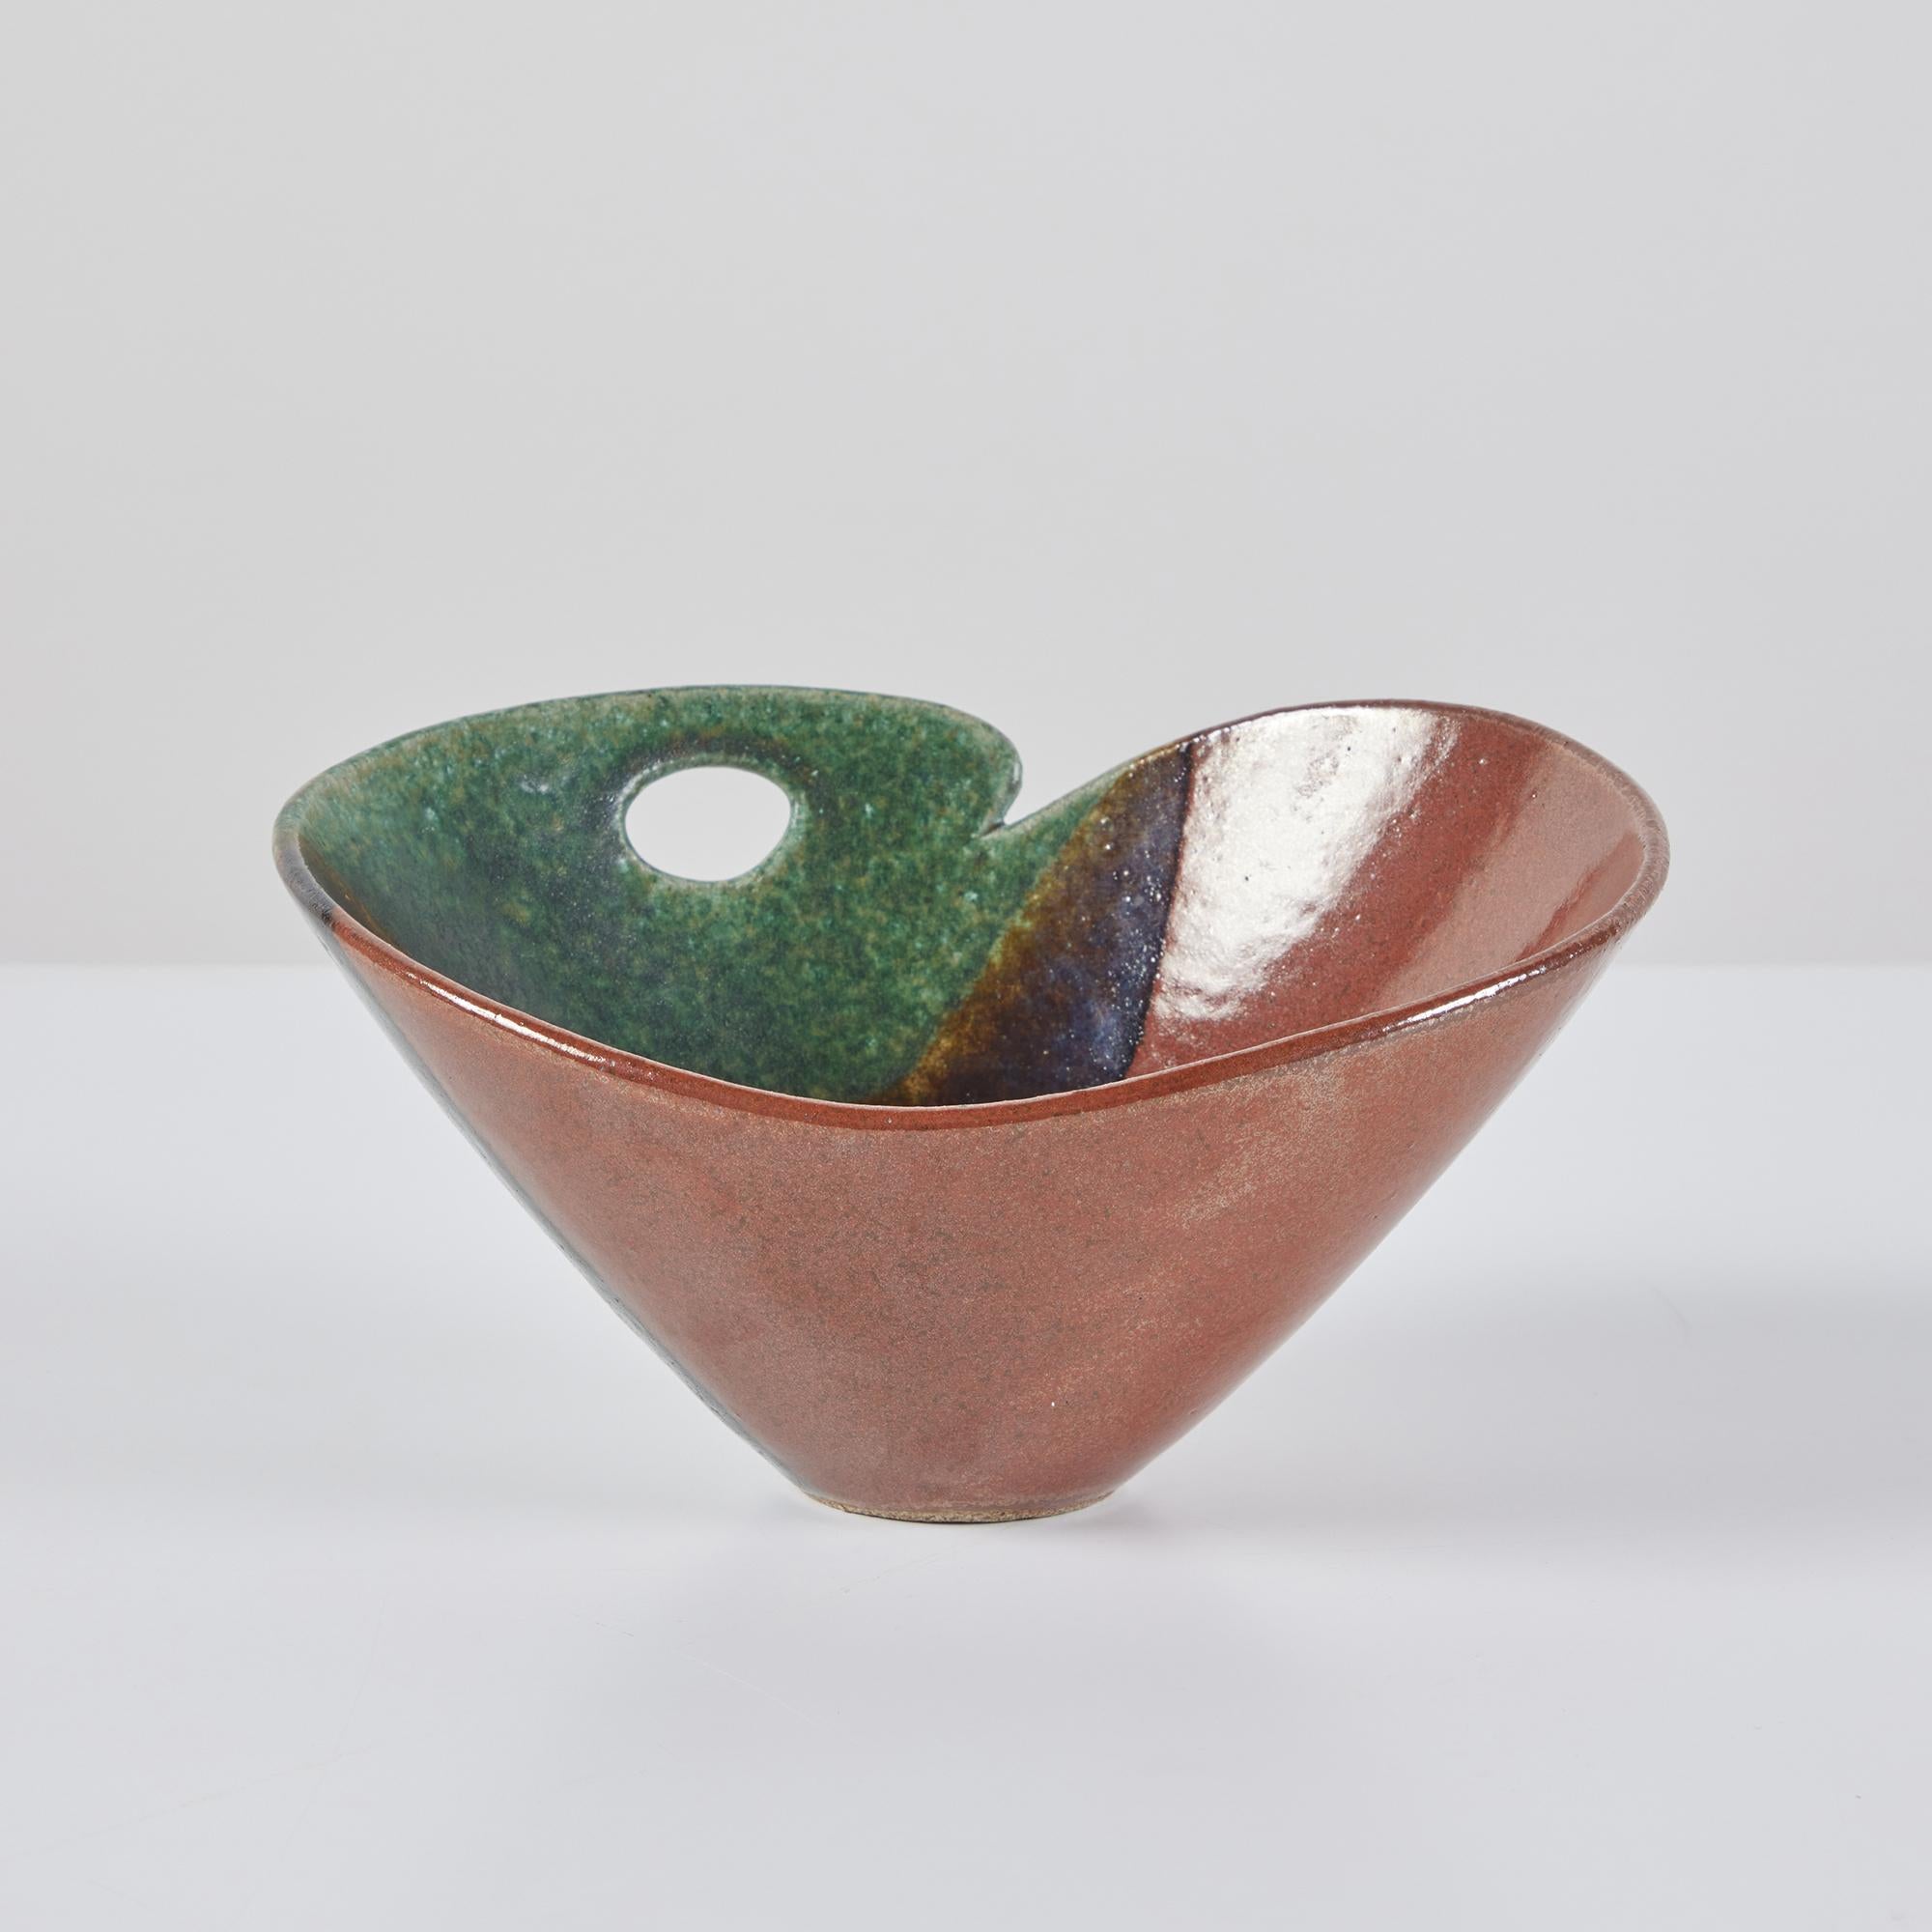 Ceramic bowl in three varying earth tone glazes that range from green to deep brown. The bowl features two higher rounded sides with a divot and an oval cutout on one of the sides.  Signed on the underside. 

Dimensions
8.25